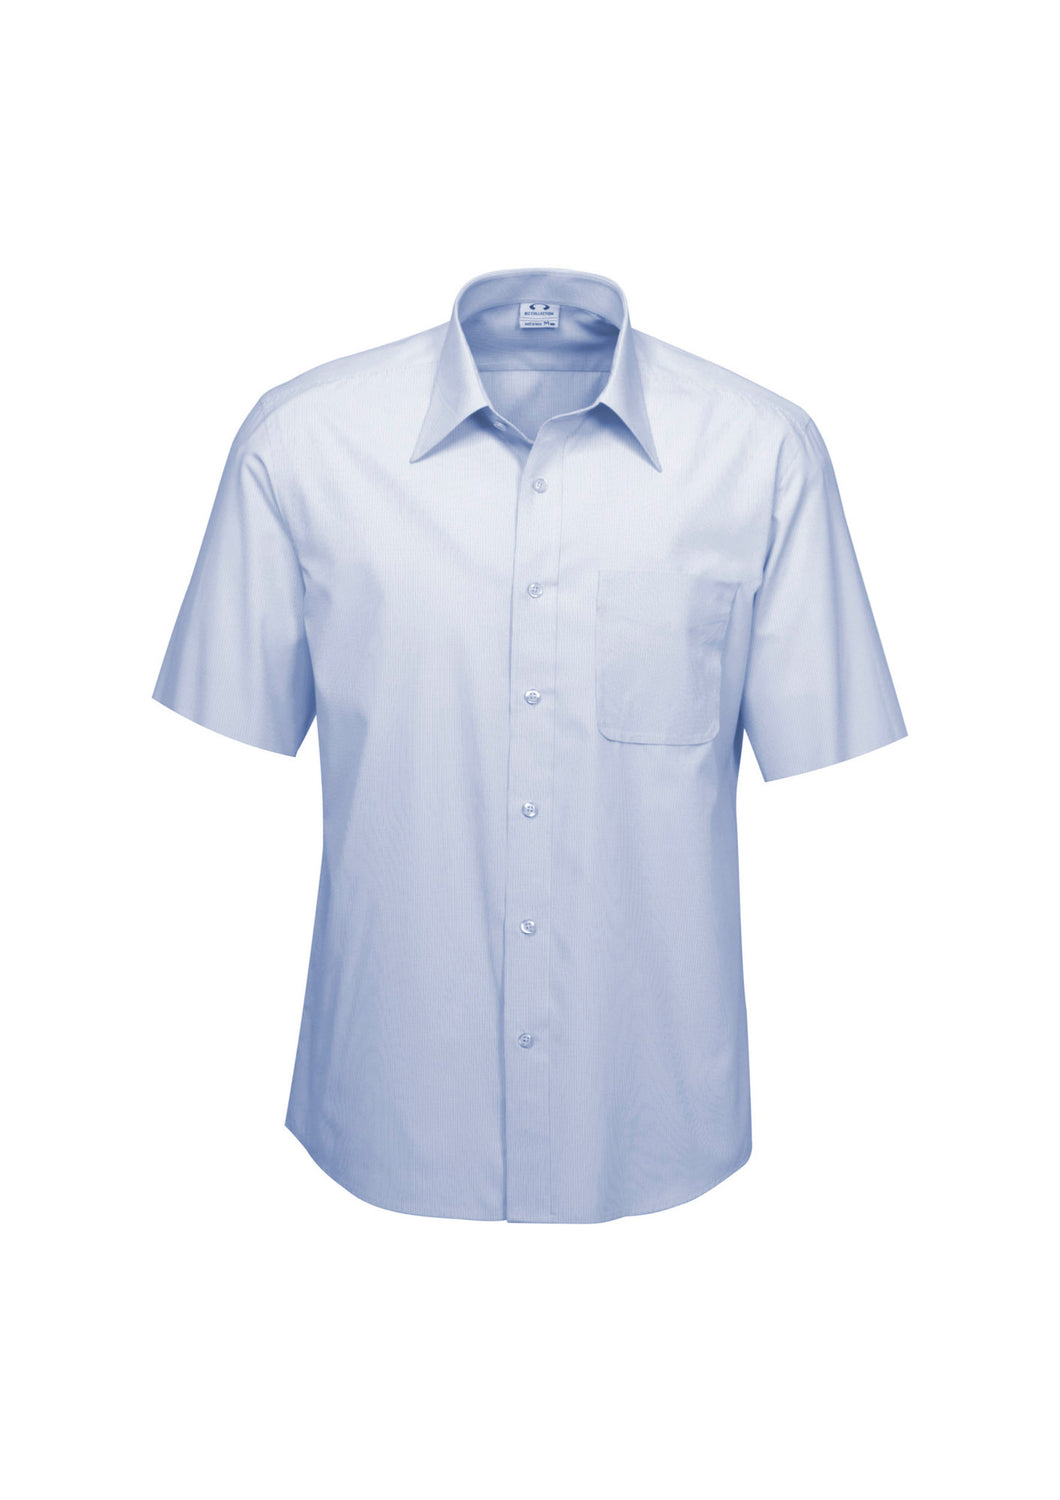 Campaign Mens Short Sleeve Shirt - Solomon Brothers Apparel